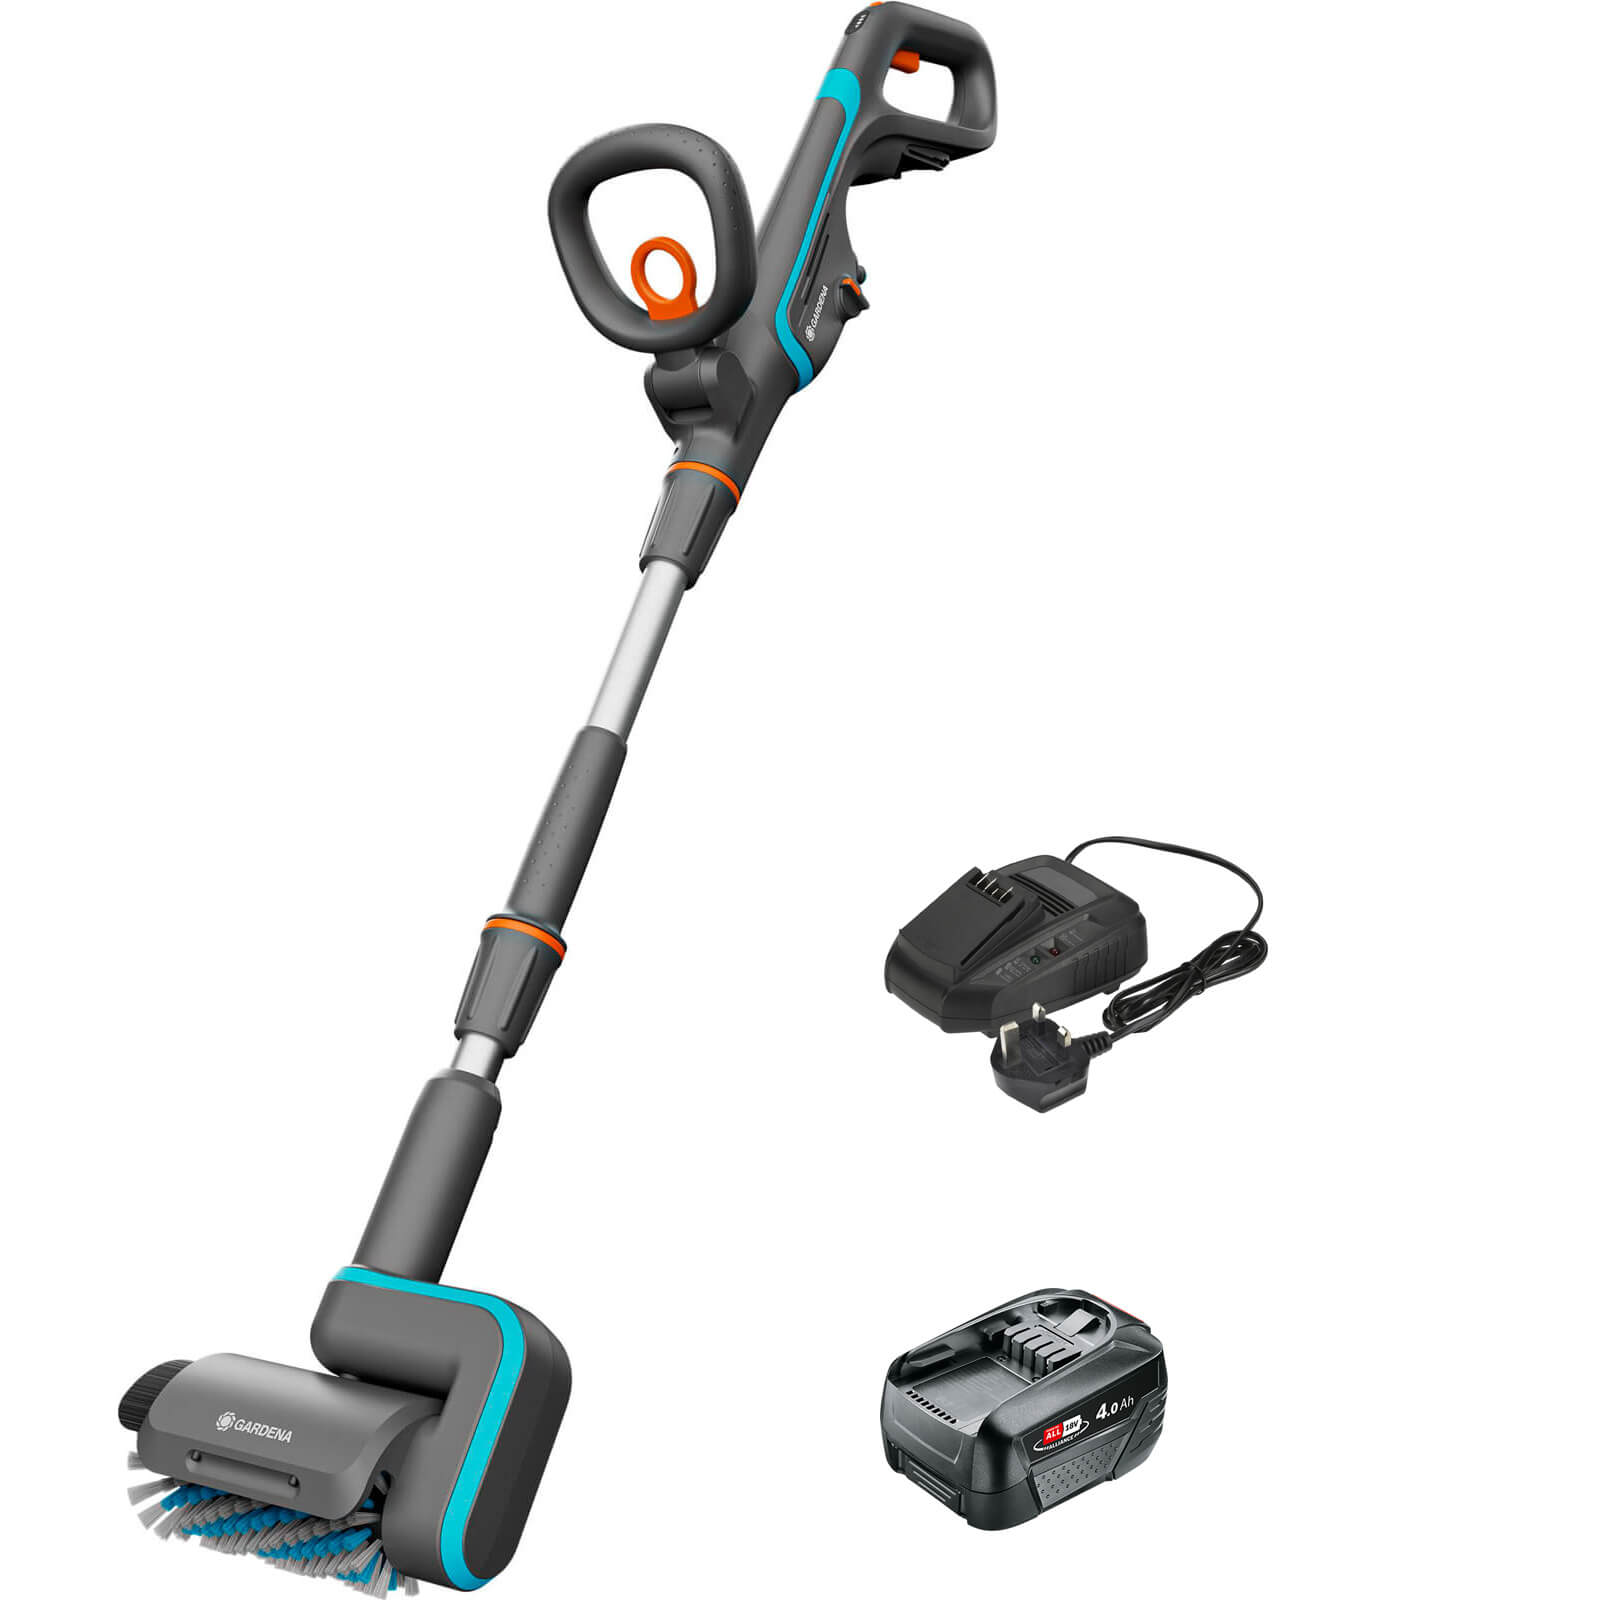 Photos - Other household chemicals GARDENA AQUABRUSH P4A 18v Cordless Patio and Surface Cleaner 1 x 4ah Li-io 